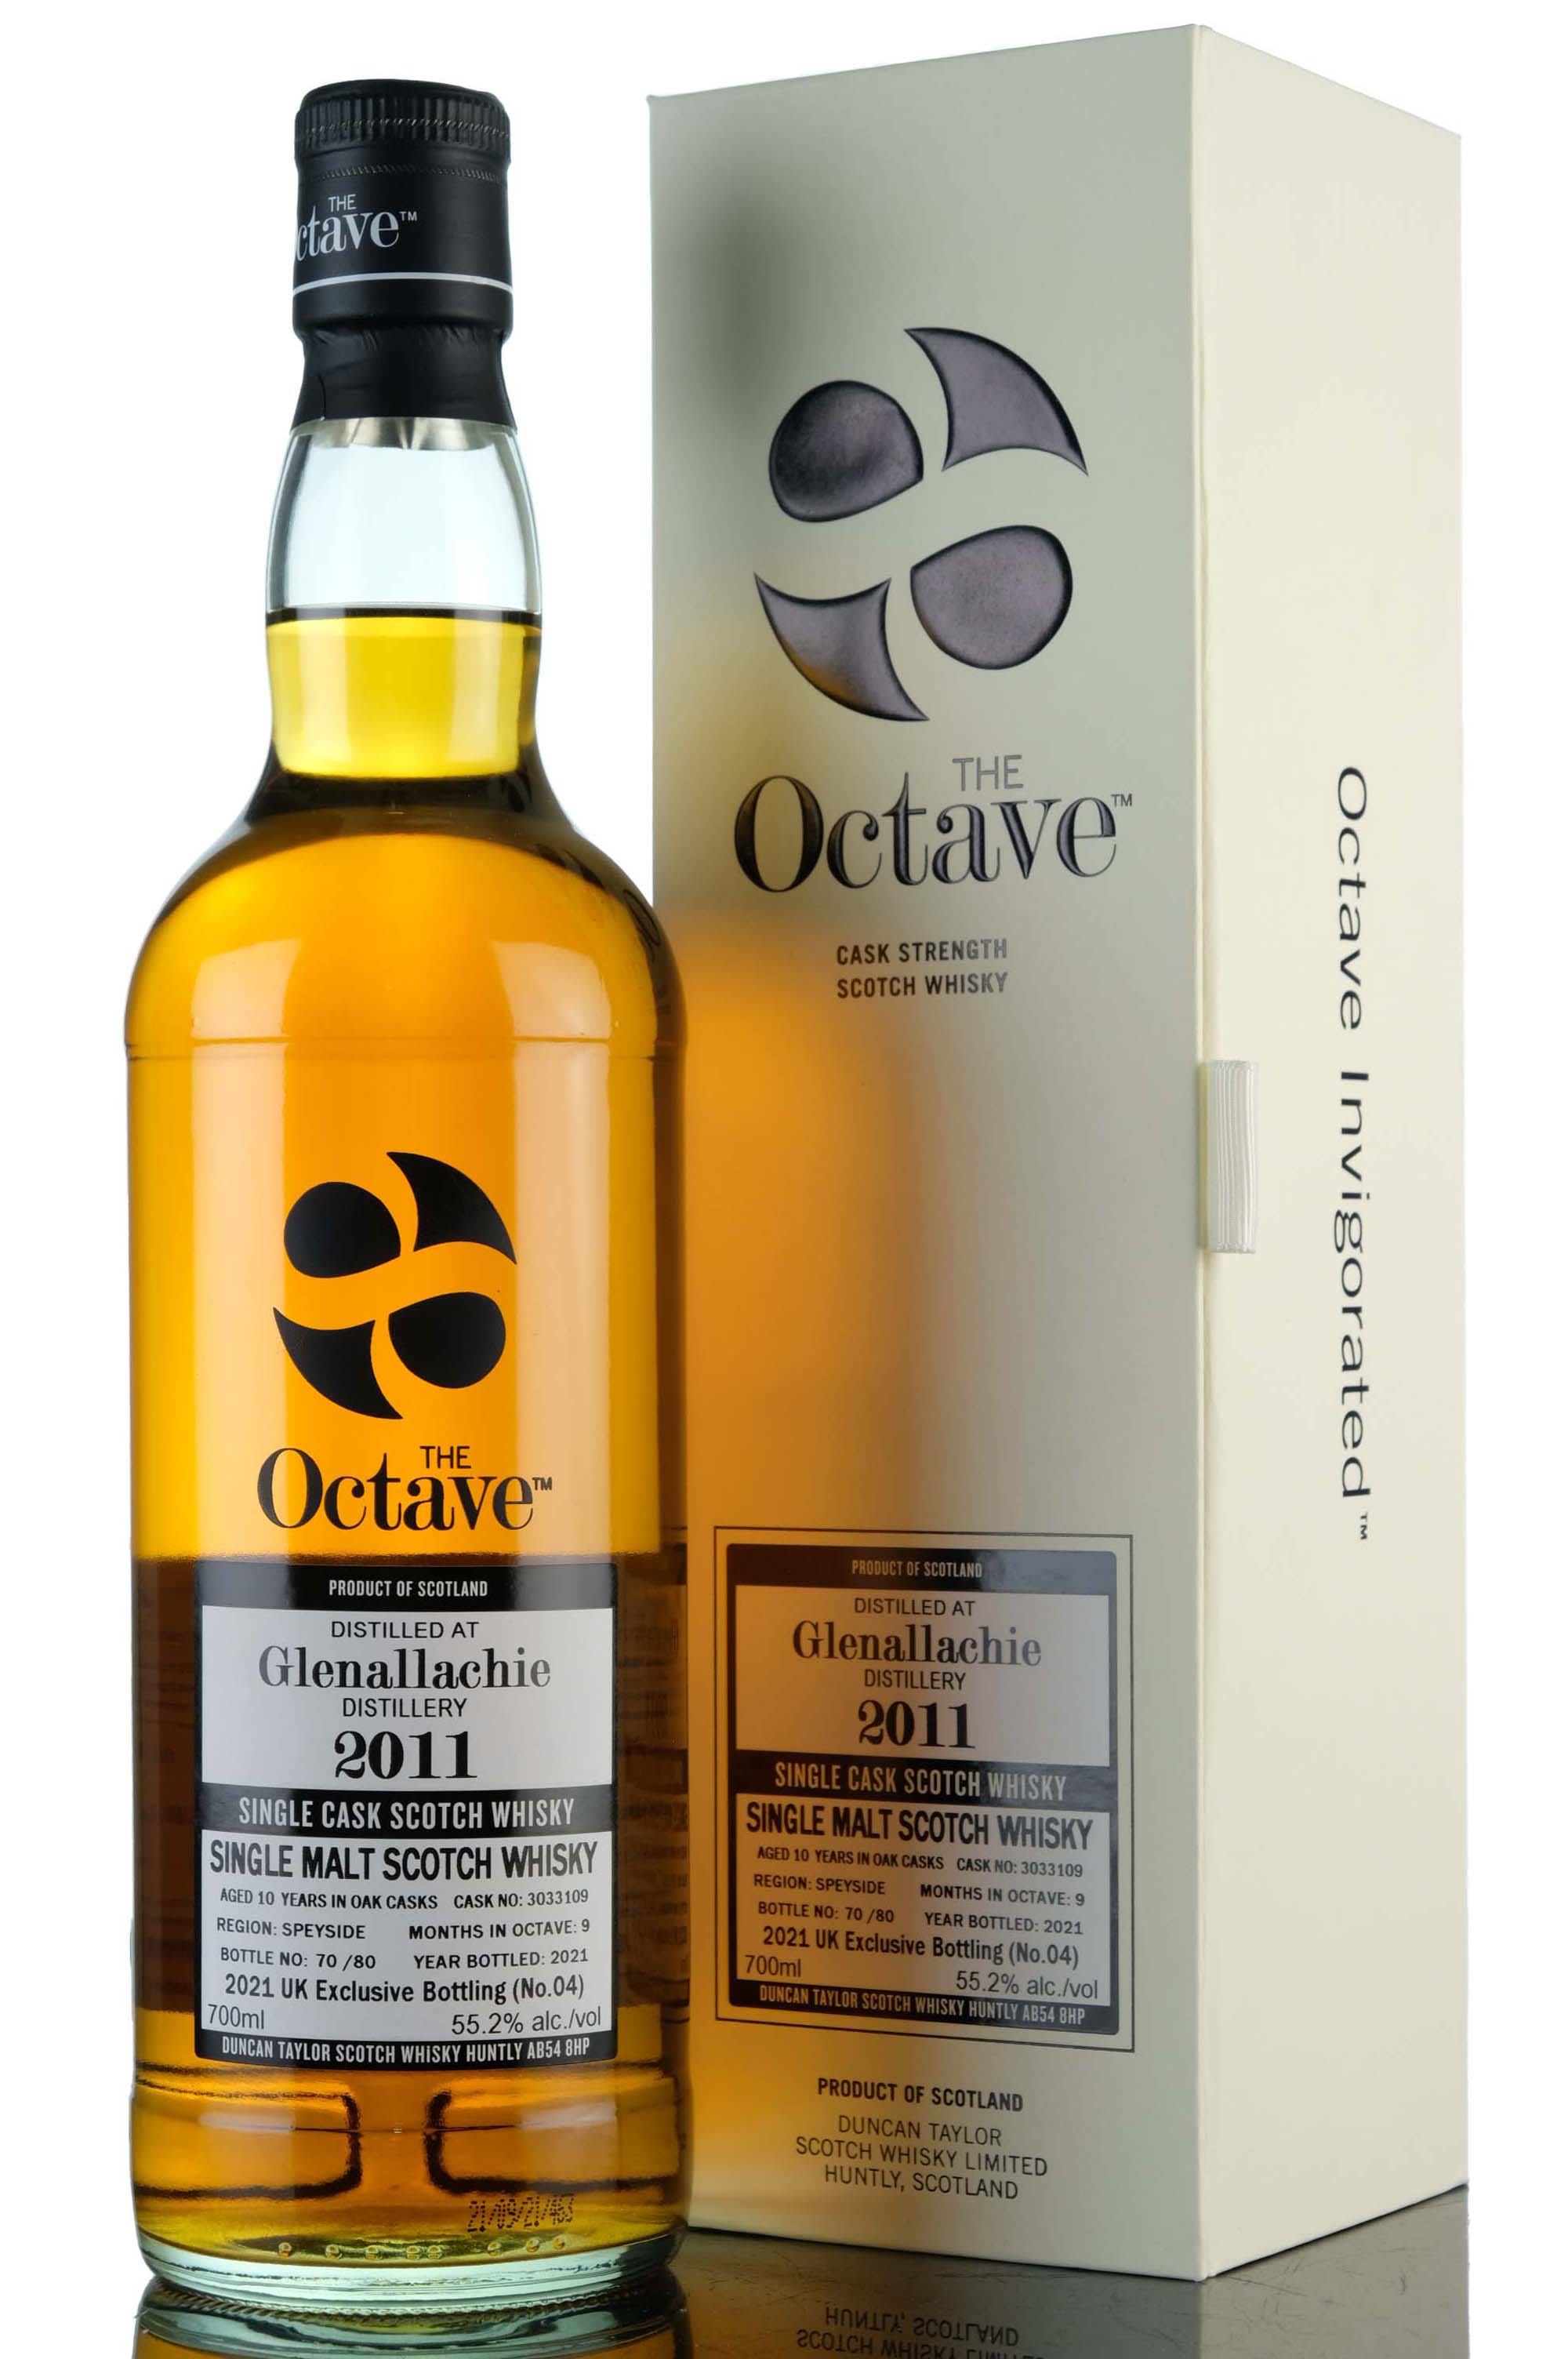 Glenallachie 2011-2021 - 10 Year Old - Duncan Taylor Octave - Single Cask 3033109 - UK Exc